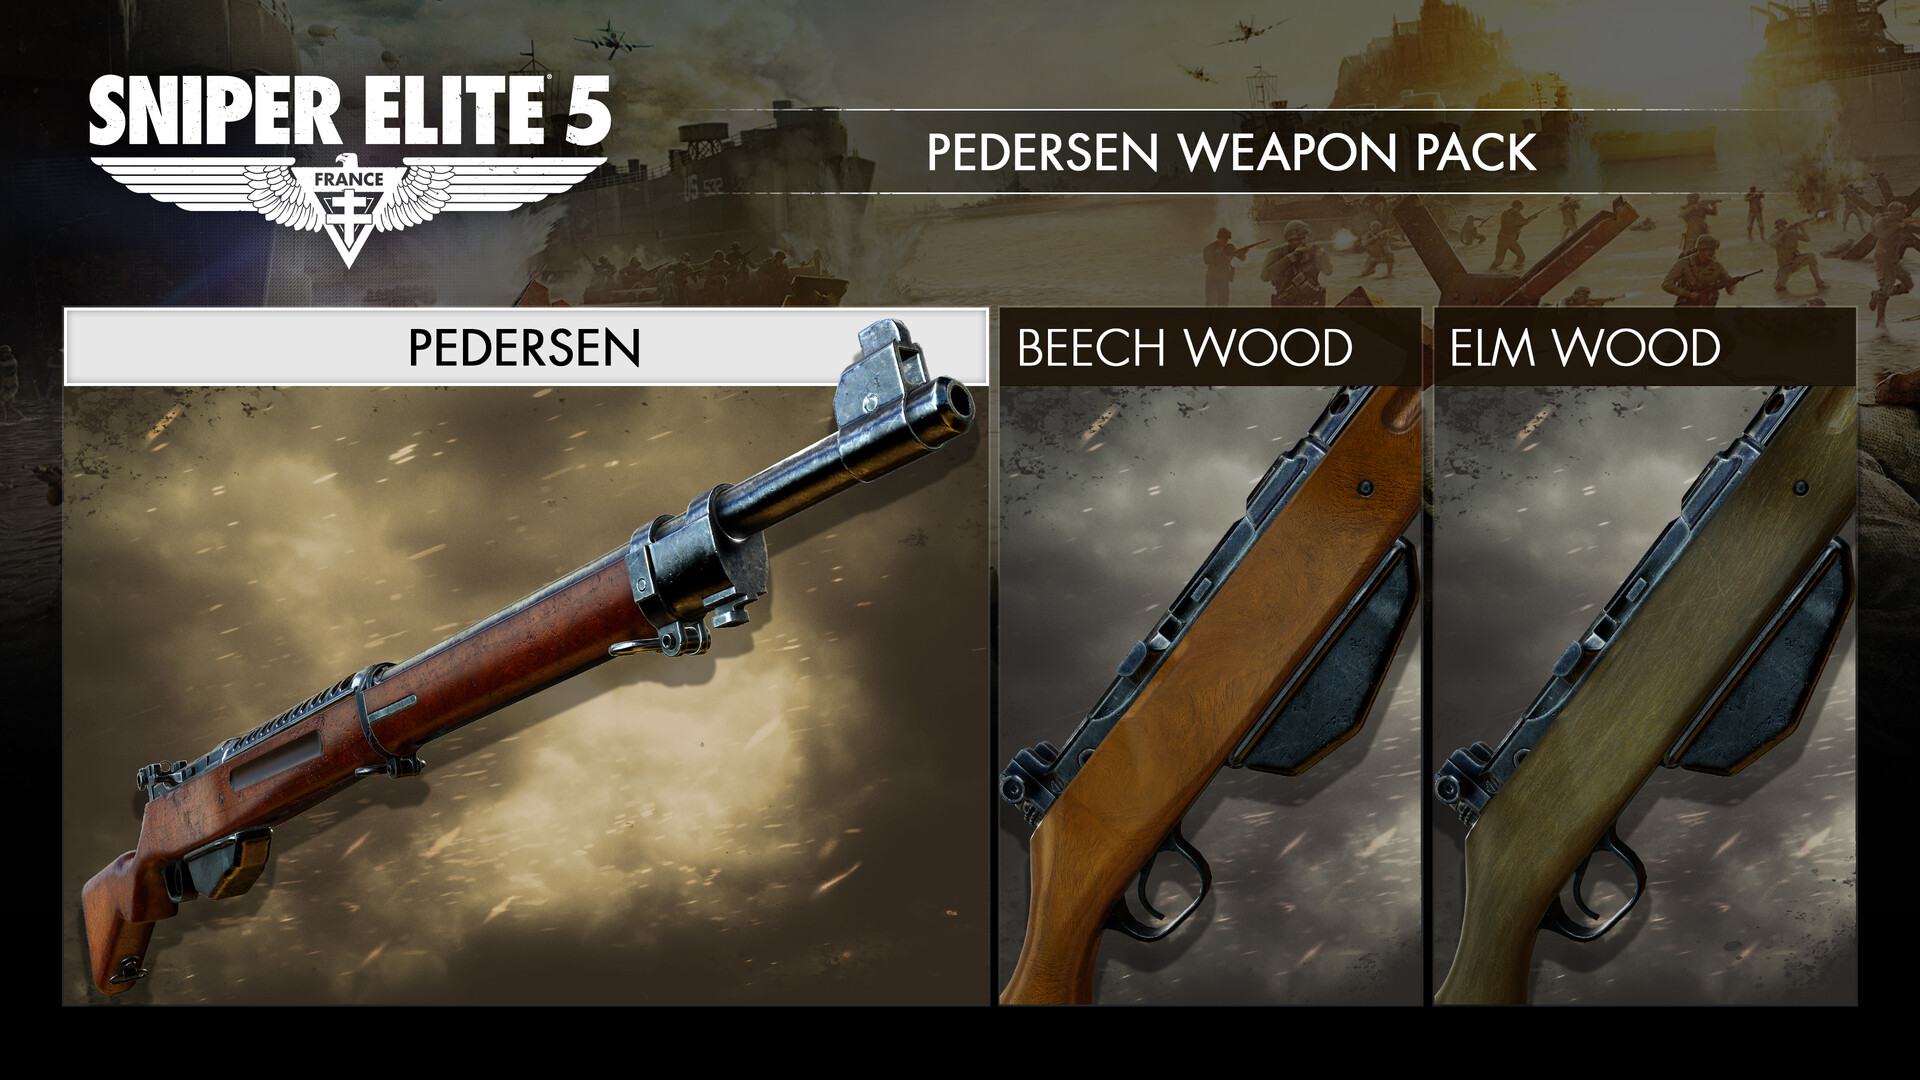 Sniper Elite 5 - Death From Above Weapon And Skin Pack DLC AR XBOX One / Xbox Series X,S / Windows 10 CD Key